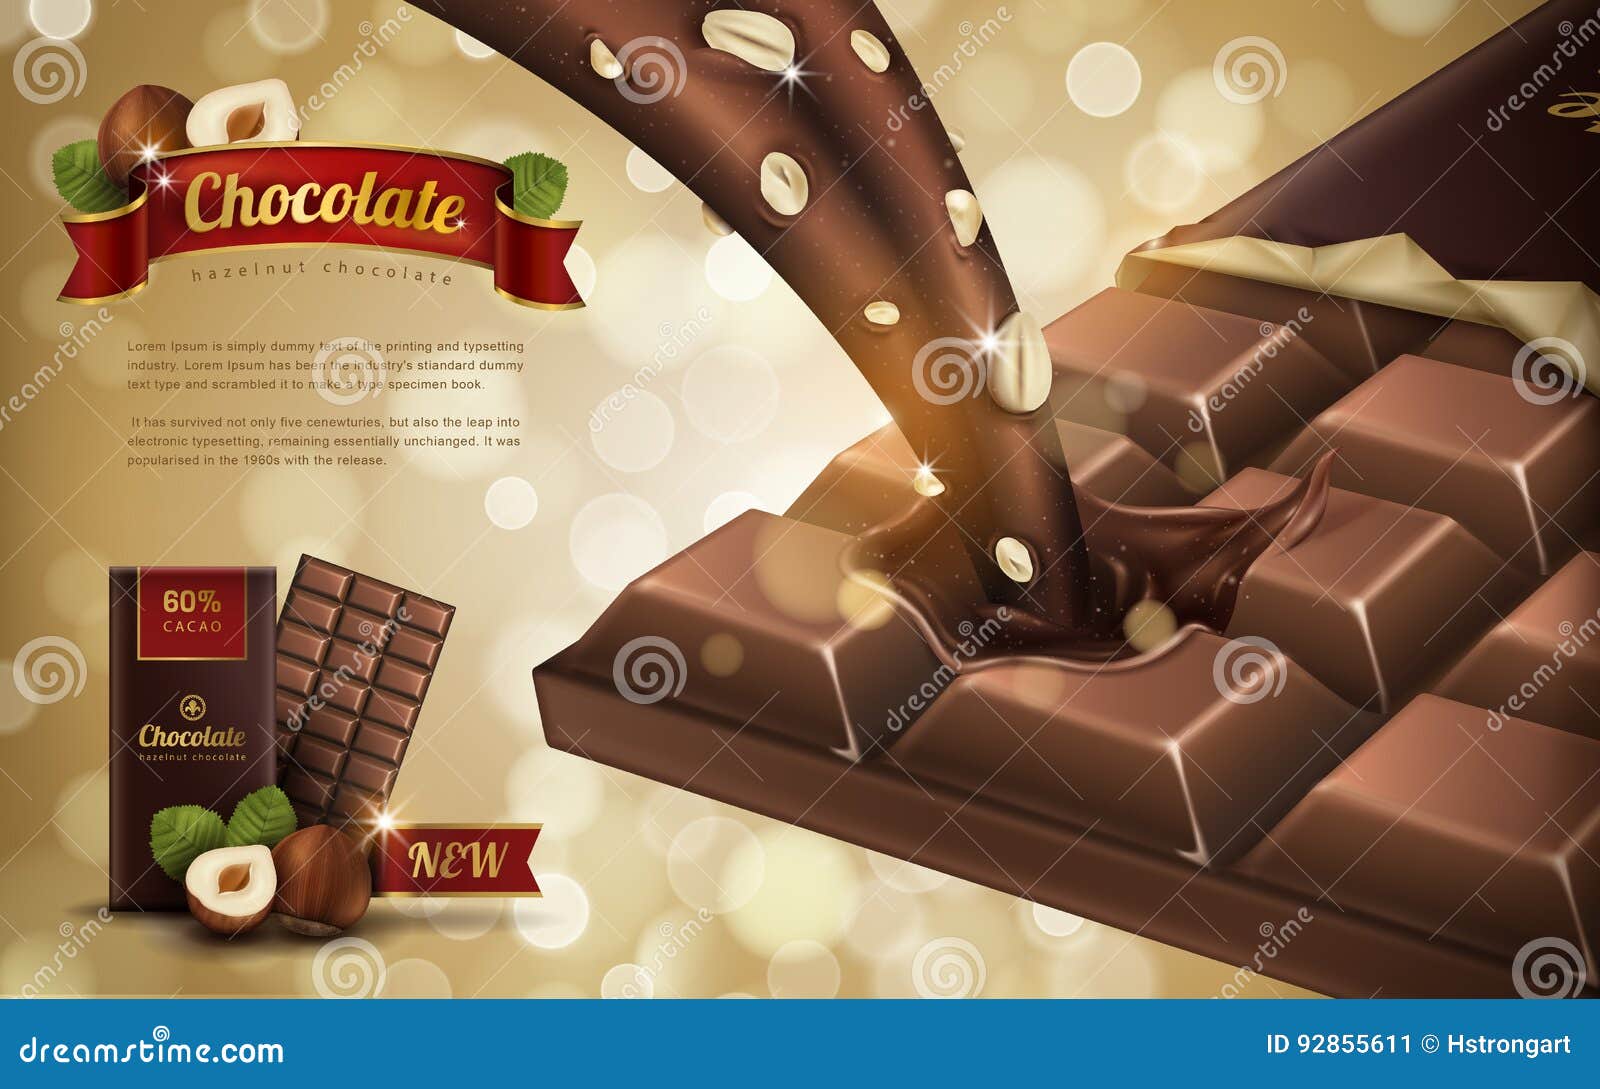 Premium Vector Hazelnut Chocolate Ad With Milk And Cocoa Flow Elements,  Brown Background, Illustration